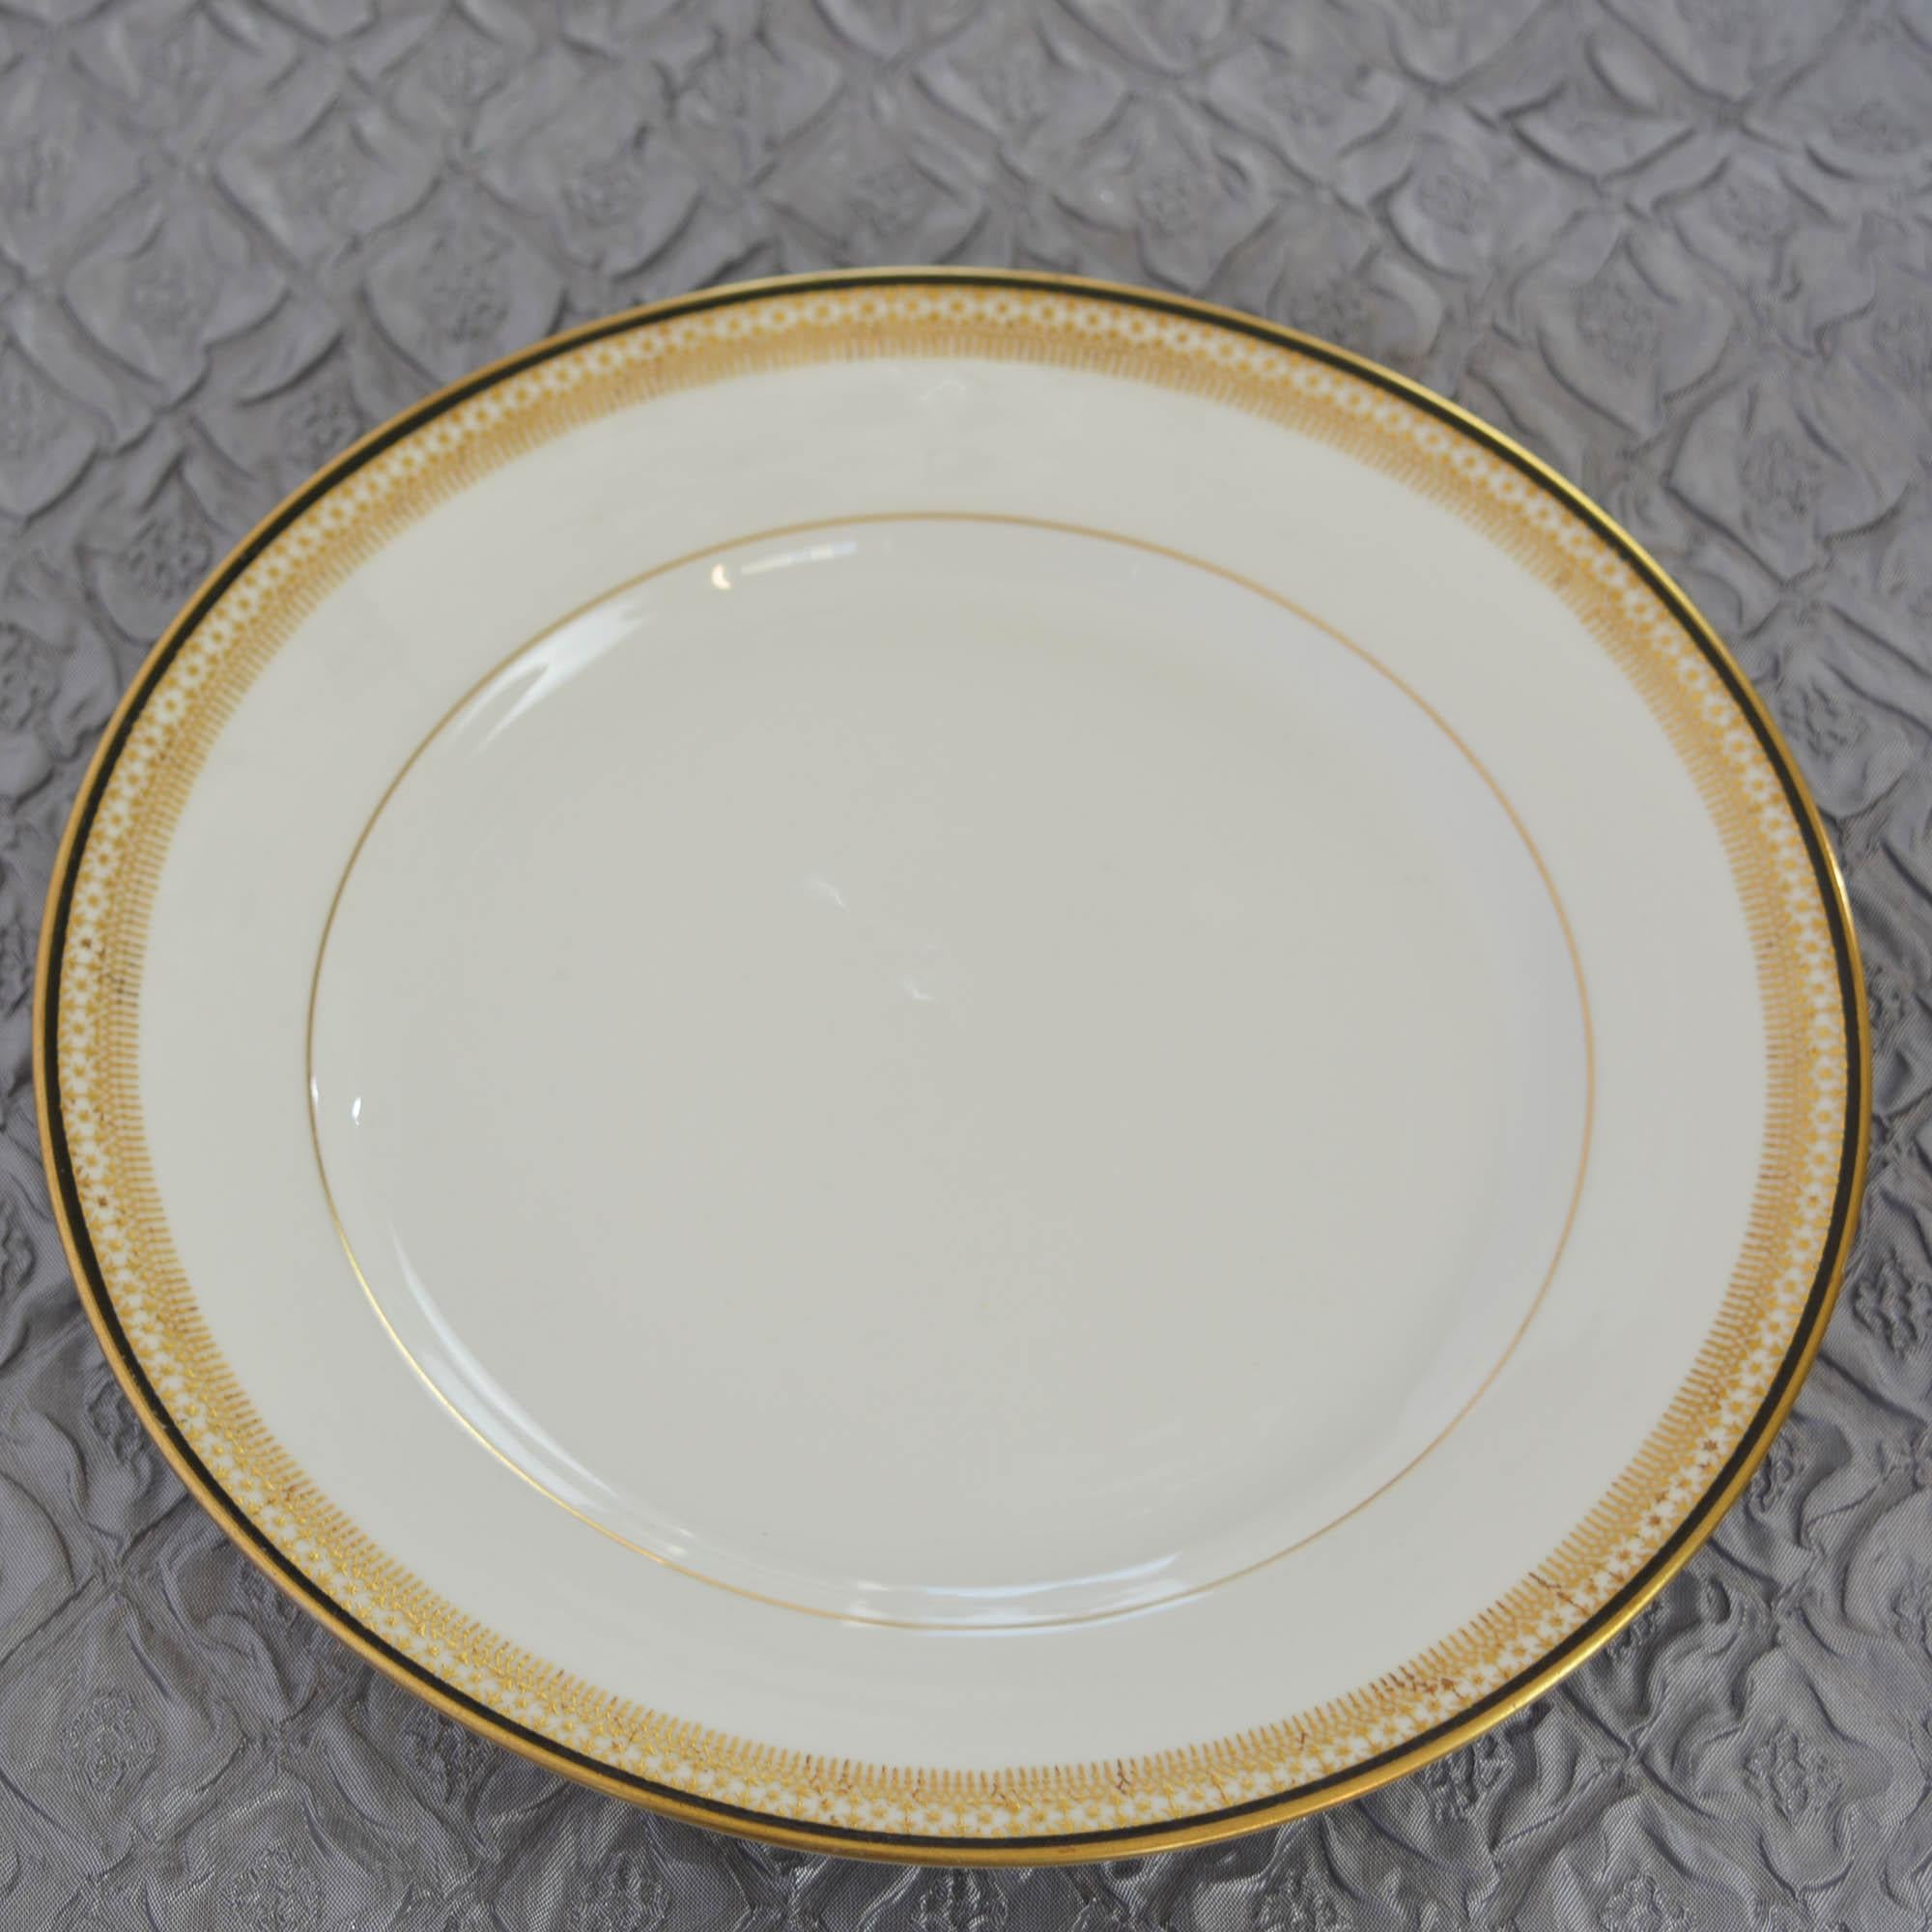 137 Piece Set China by Tressemann and Vogt of Limoges Service for 18 2